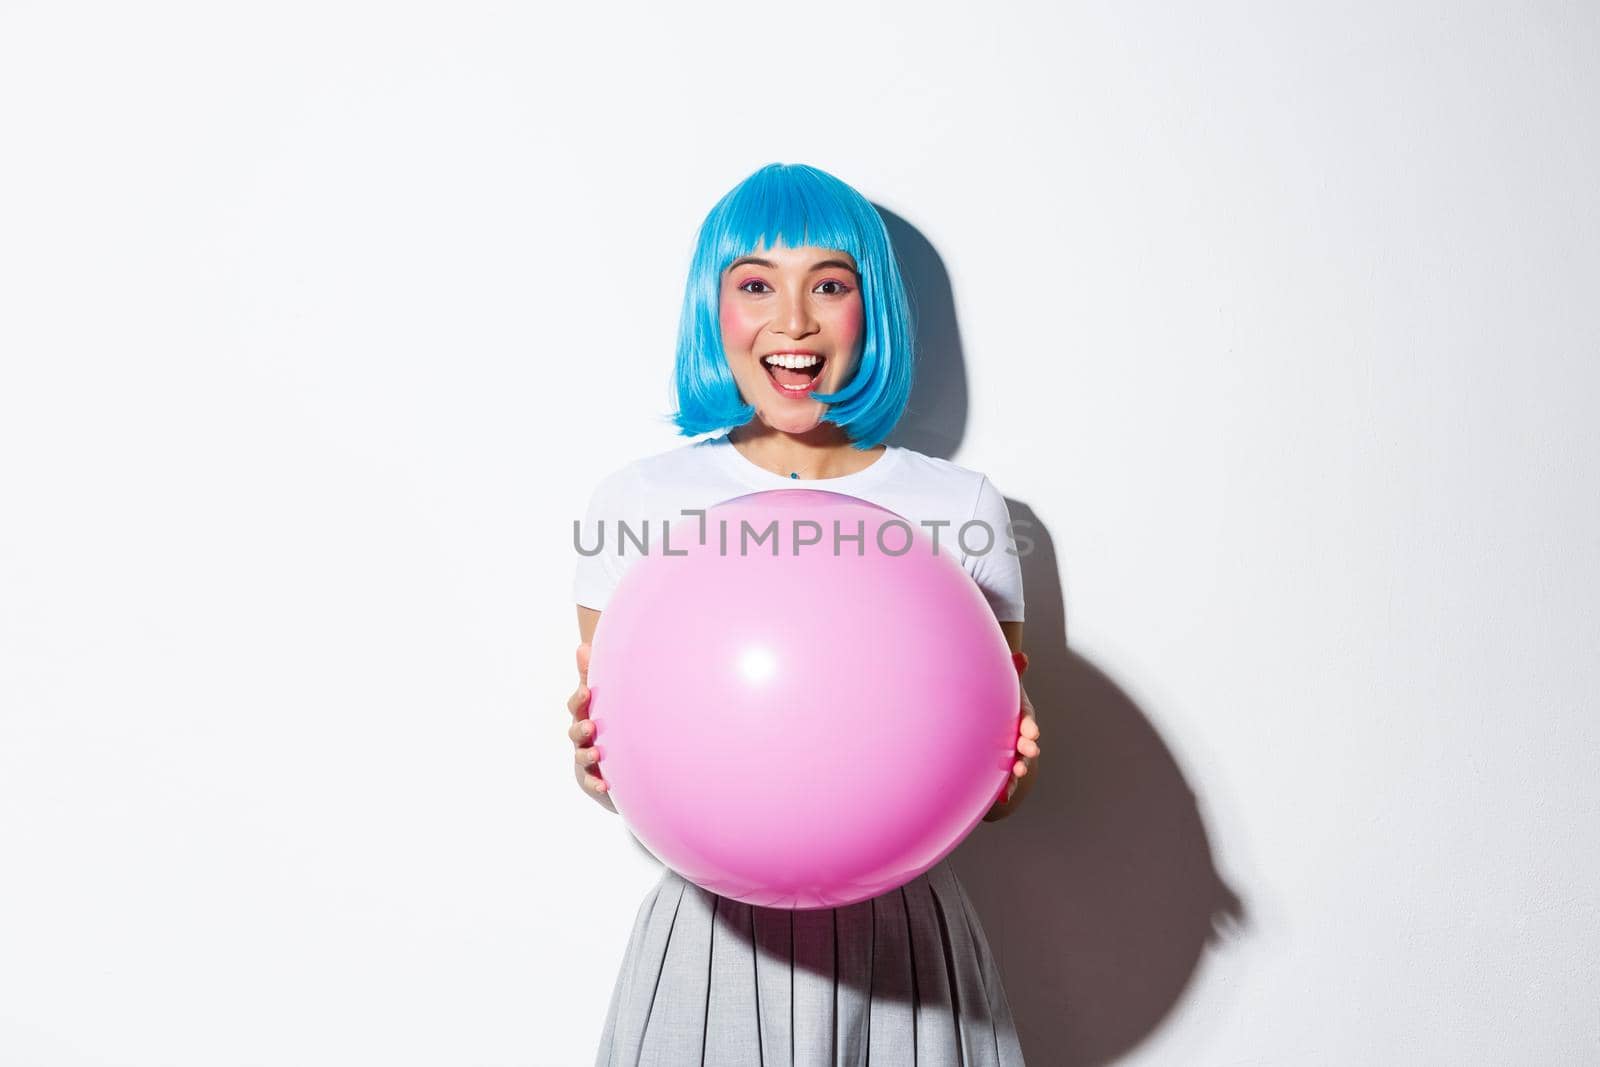 Image of cheerful asian girl in blue wig, celebrating holiday, wearing outfit for halloween party, holding large pink balloon and looking amazed.